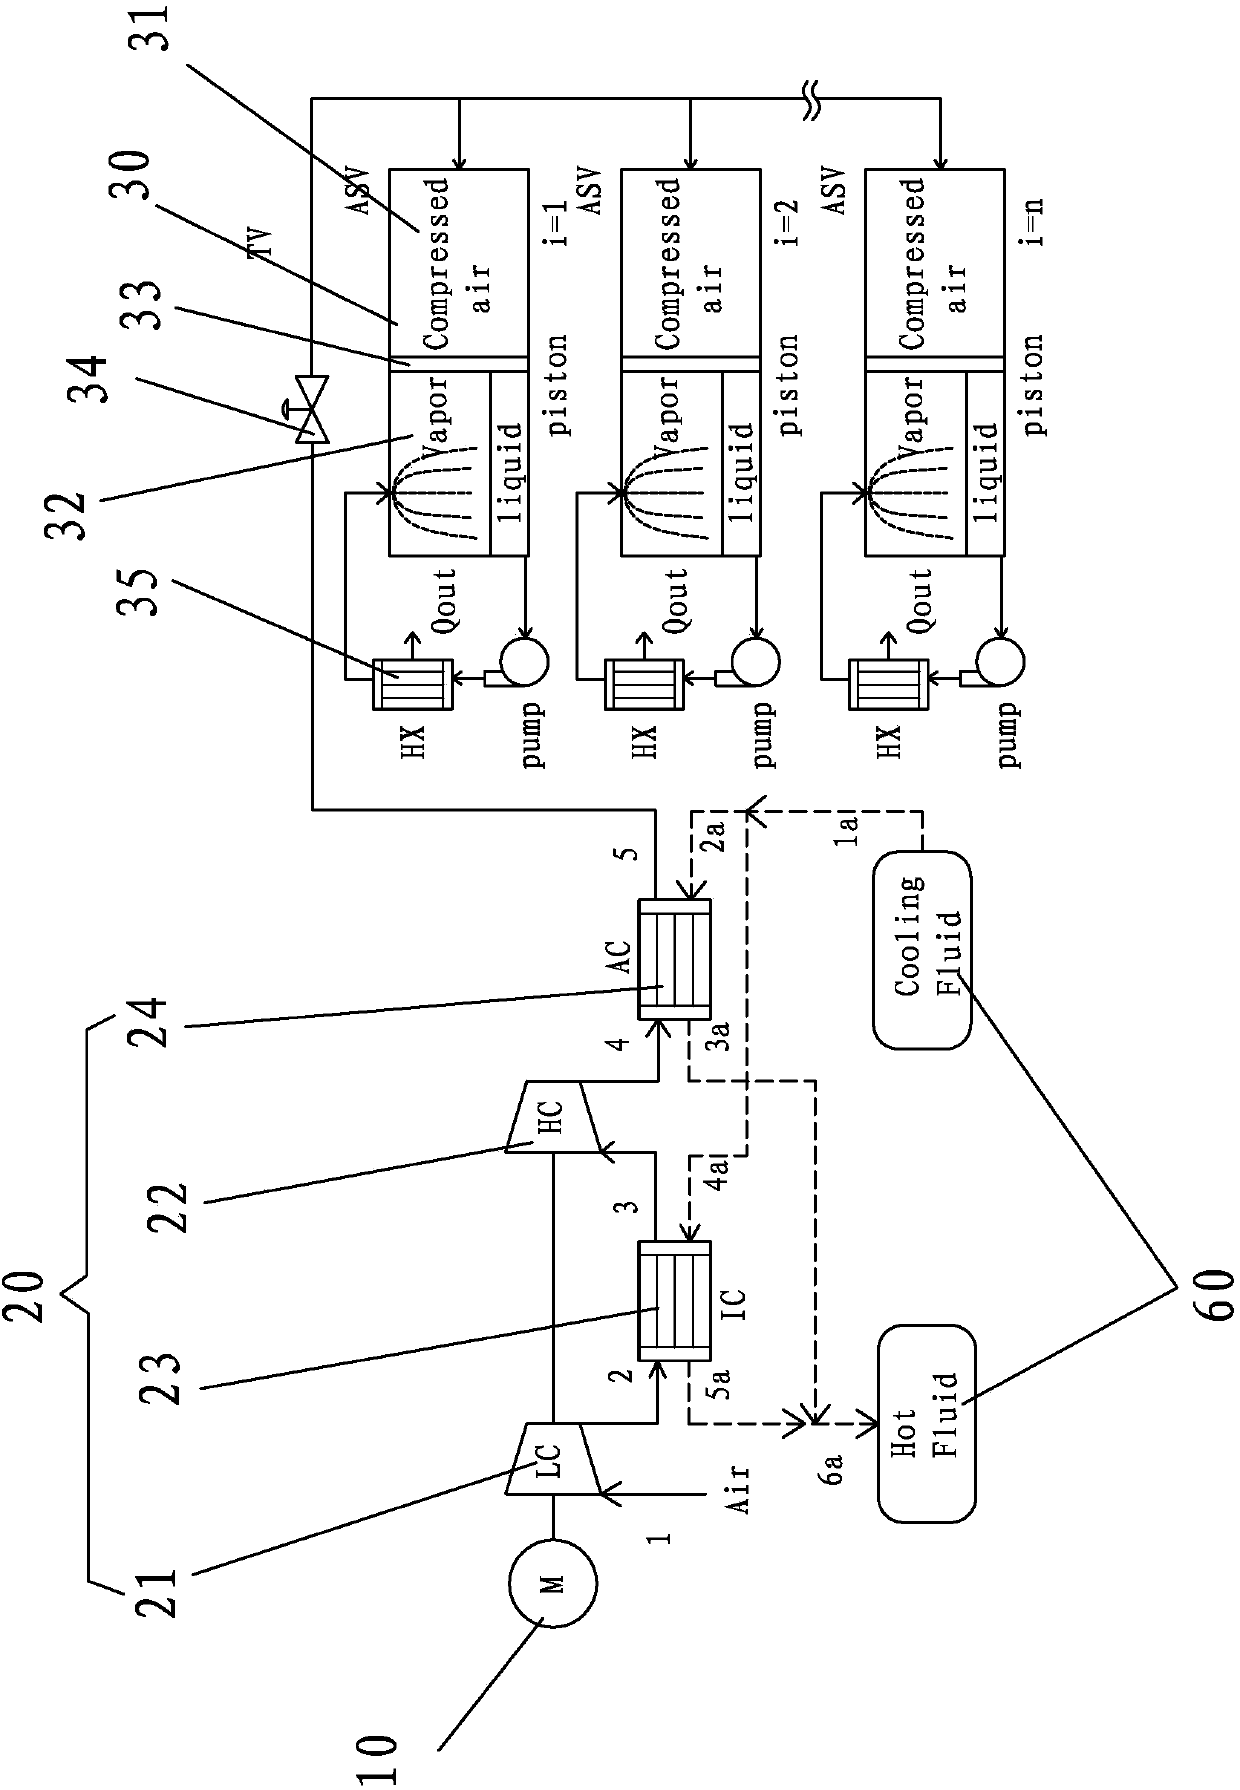 Thermal insulation constant-pressure compressed air energy storage system based on volatile fluid